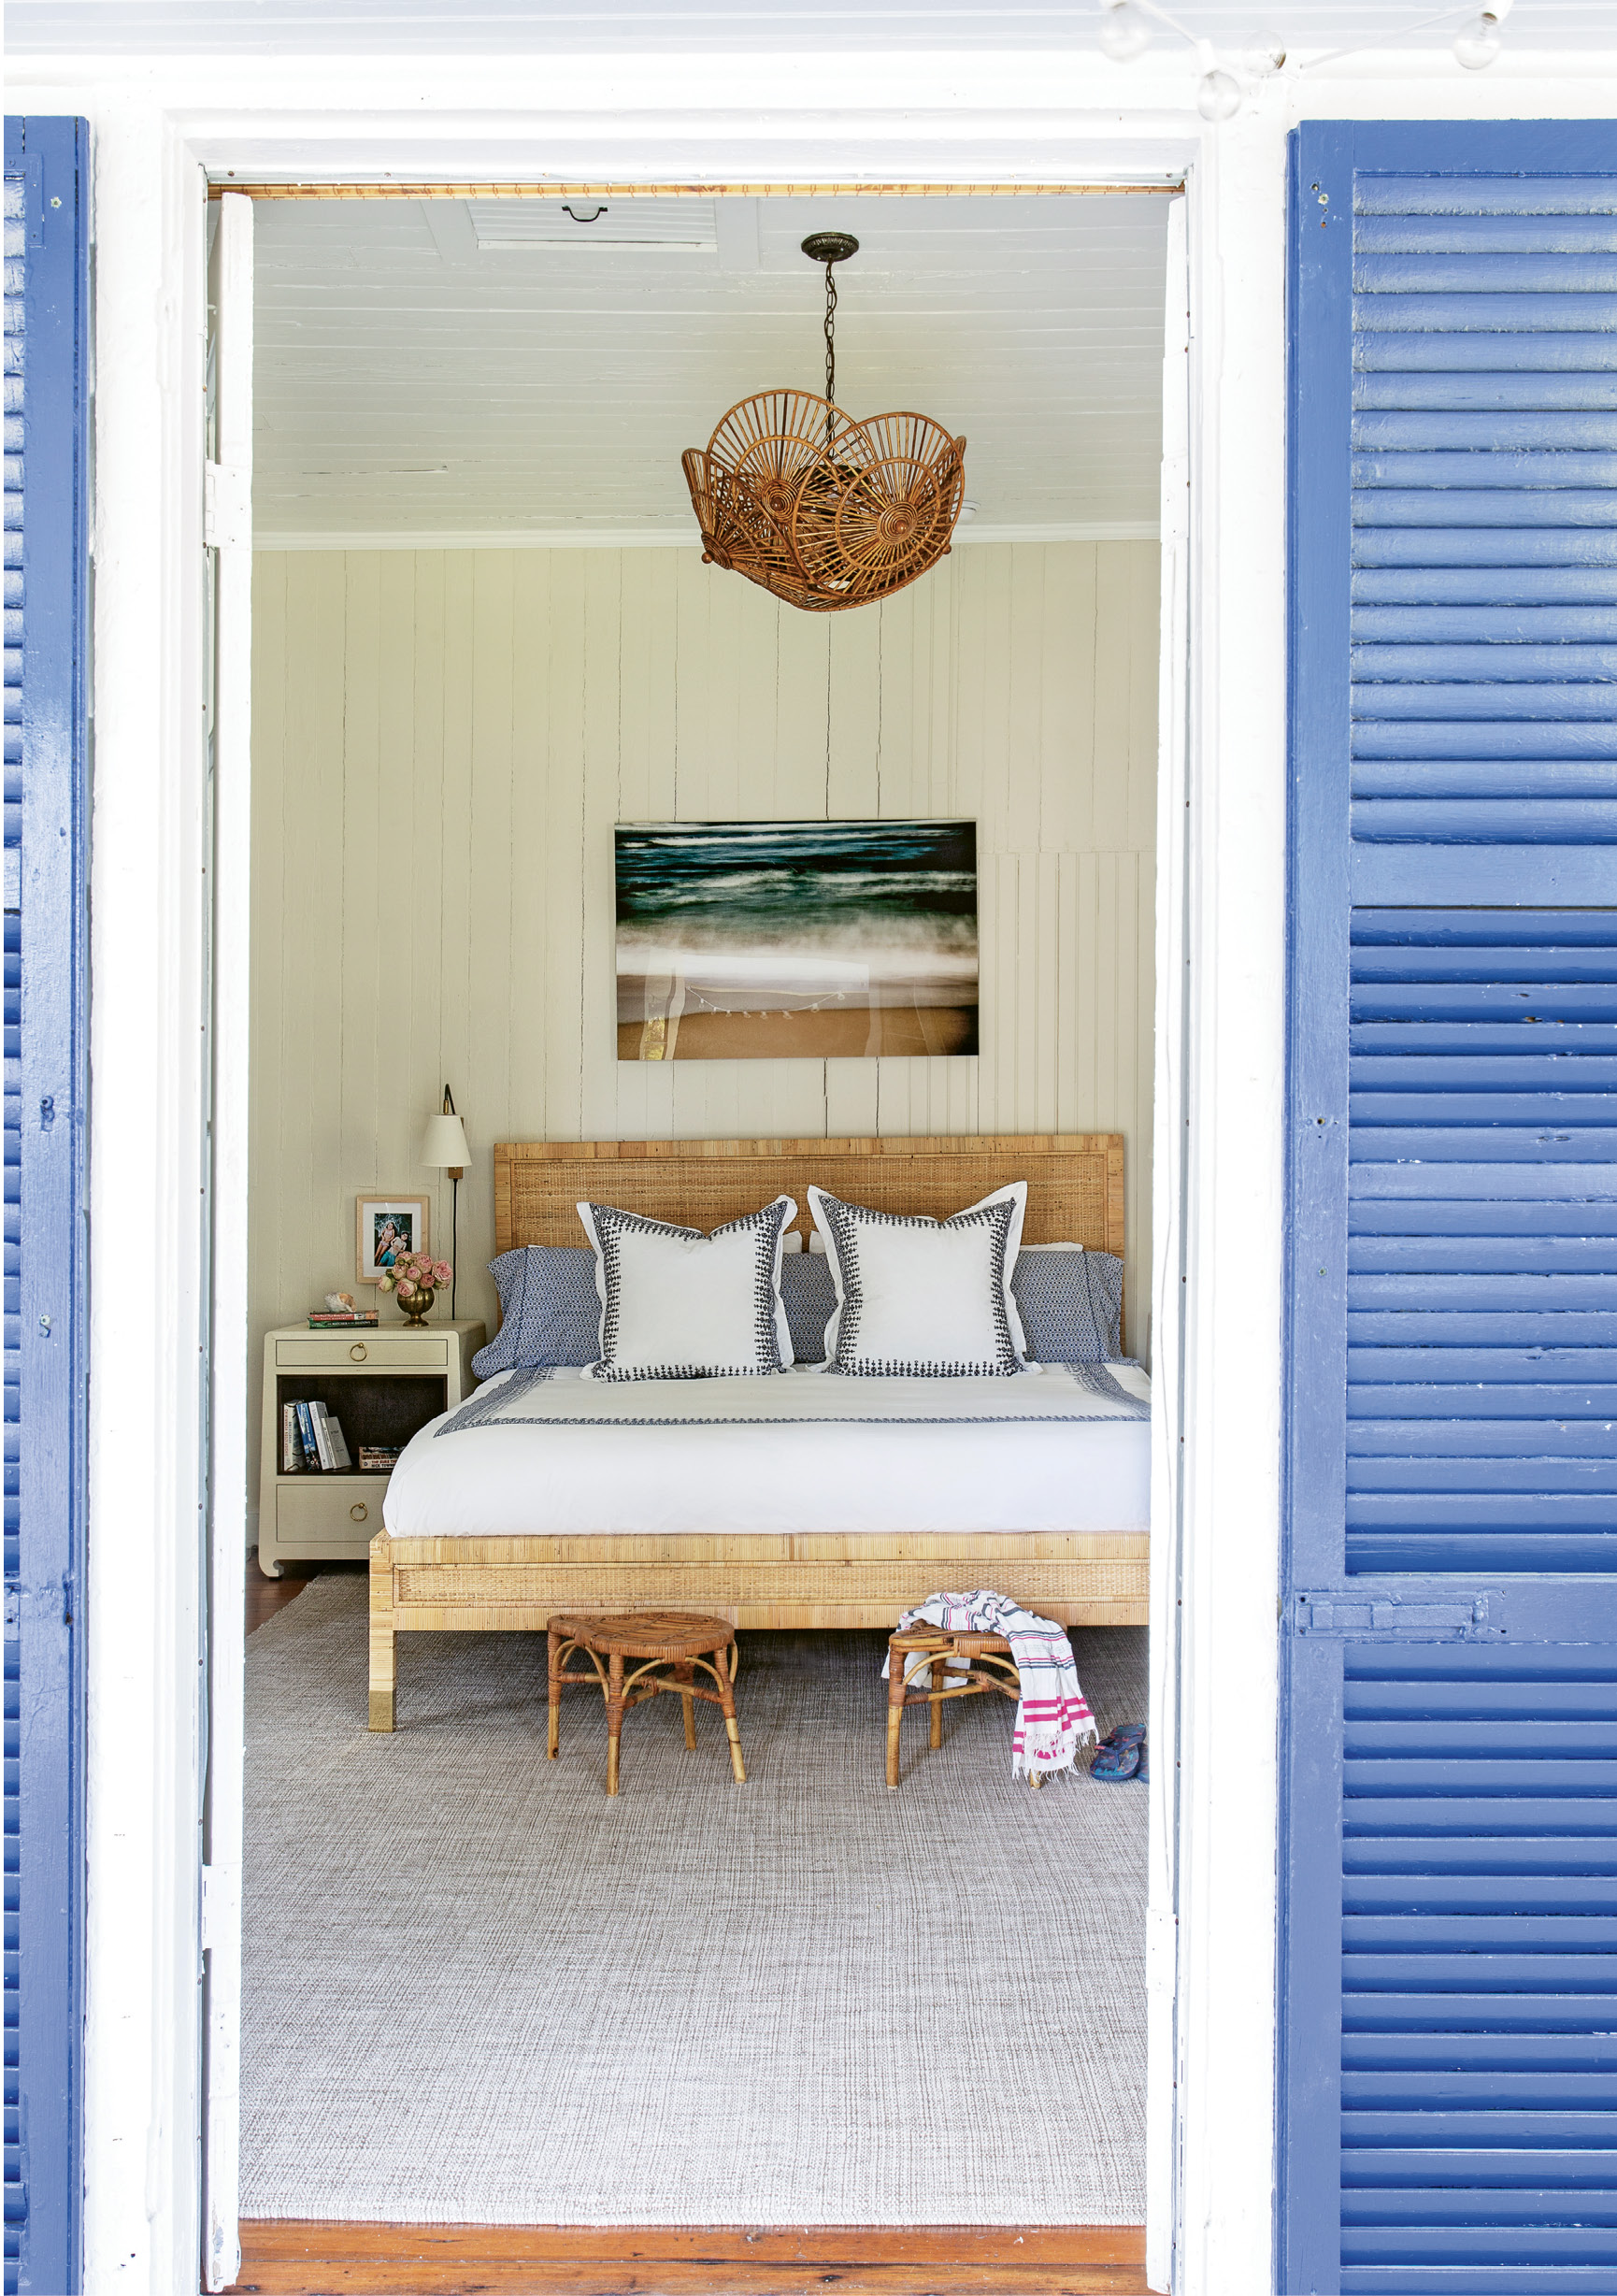 Comfortable Quarters: A large Dash and Albert rug softens the master bedroom, which has its own access to the porch. Two vintage rattan stools provide the perfect spot to drop the towels post-beach day, and a pair of Bungalow 5 bedside tables are the ideal place to stash summer reading.